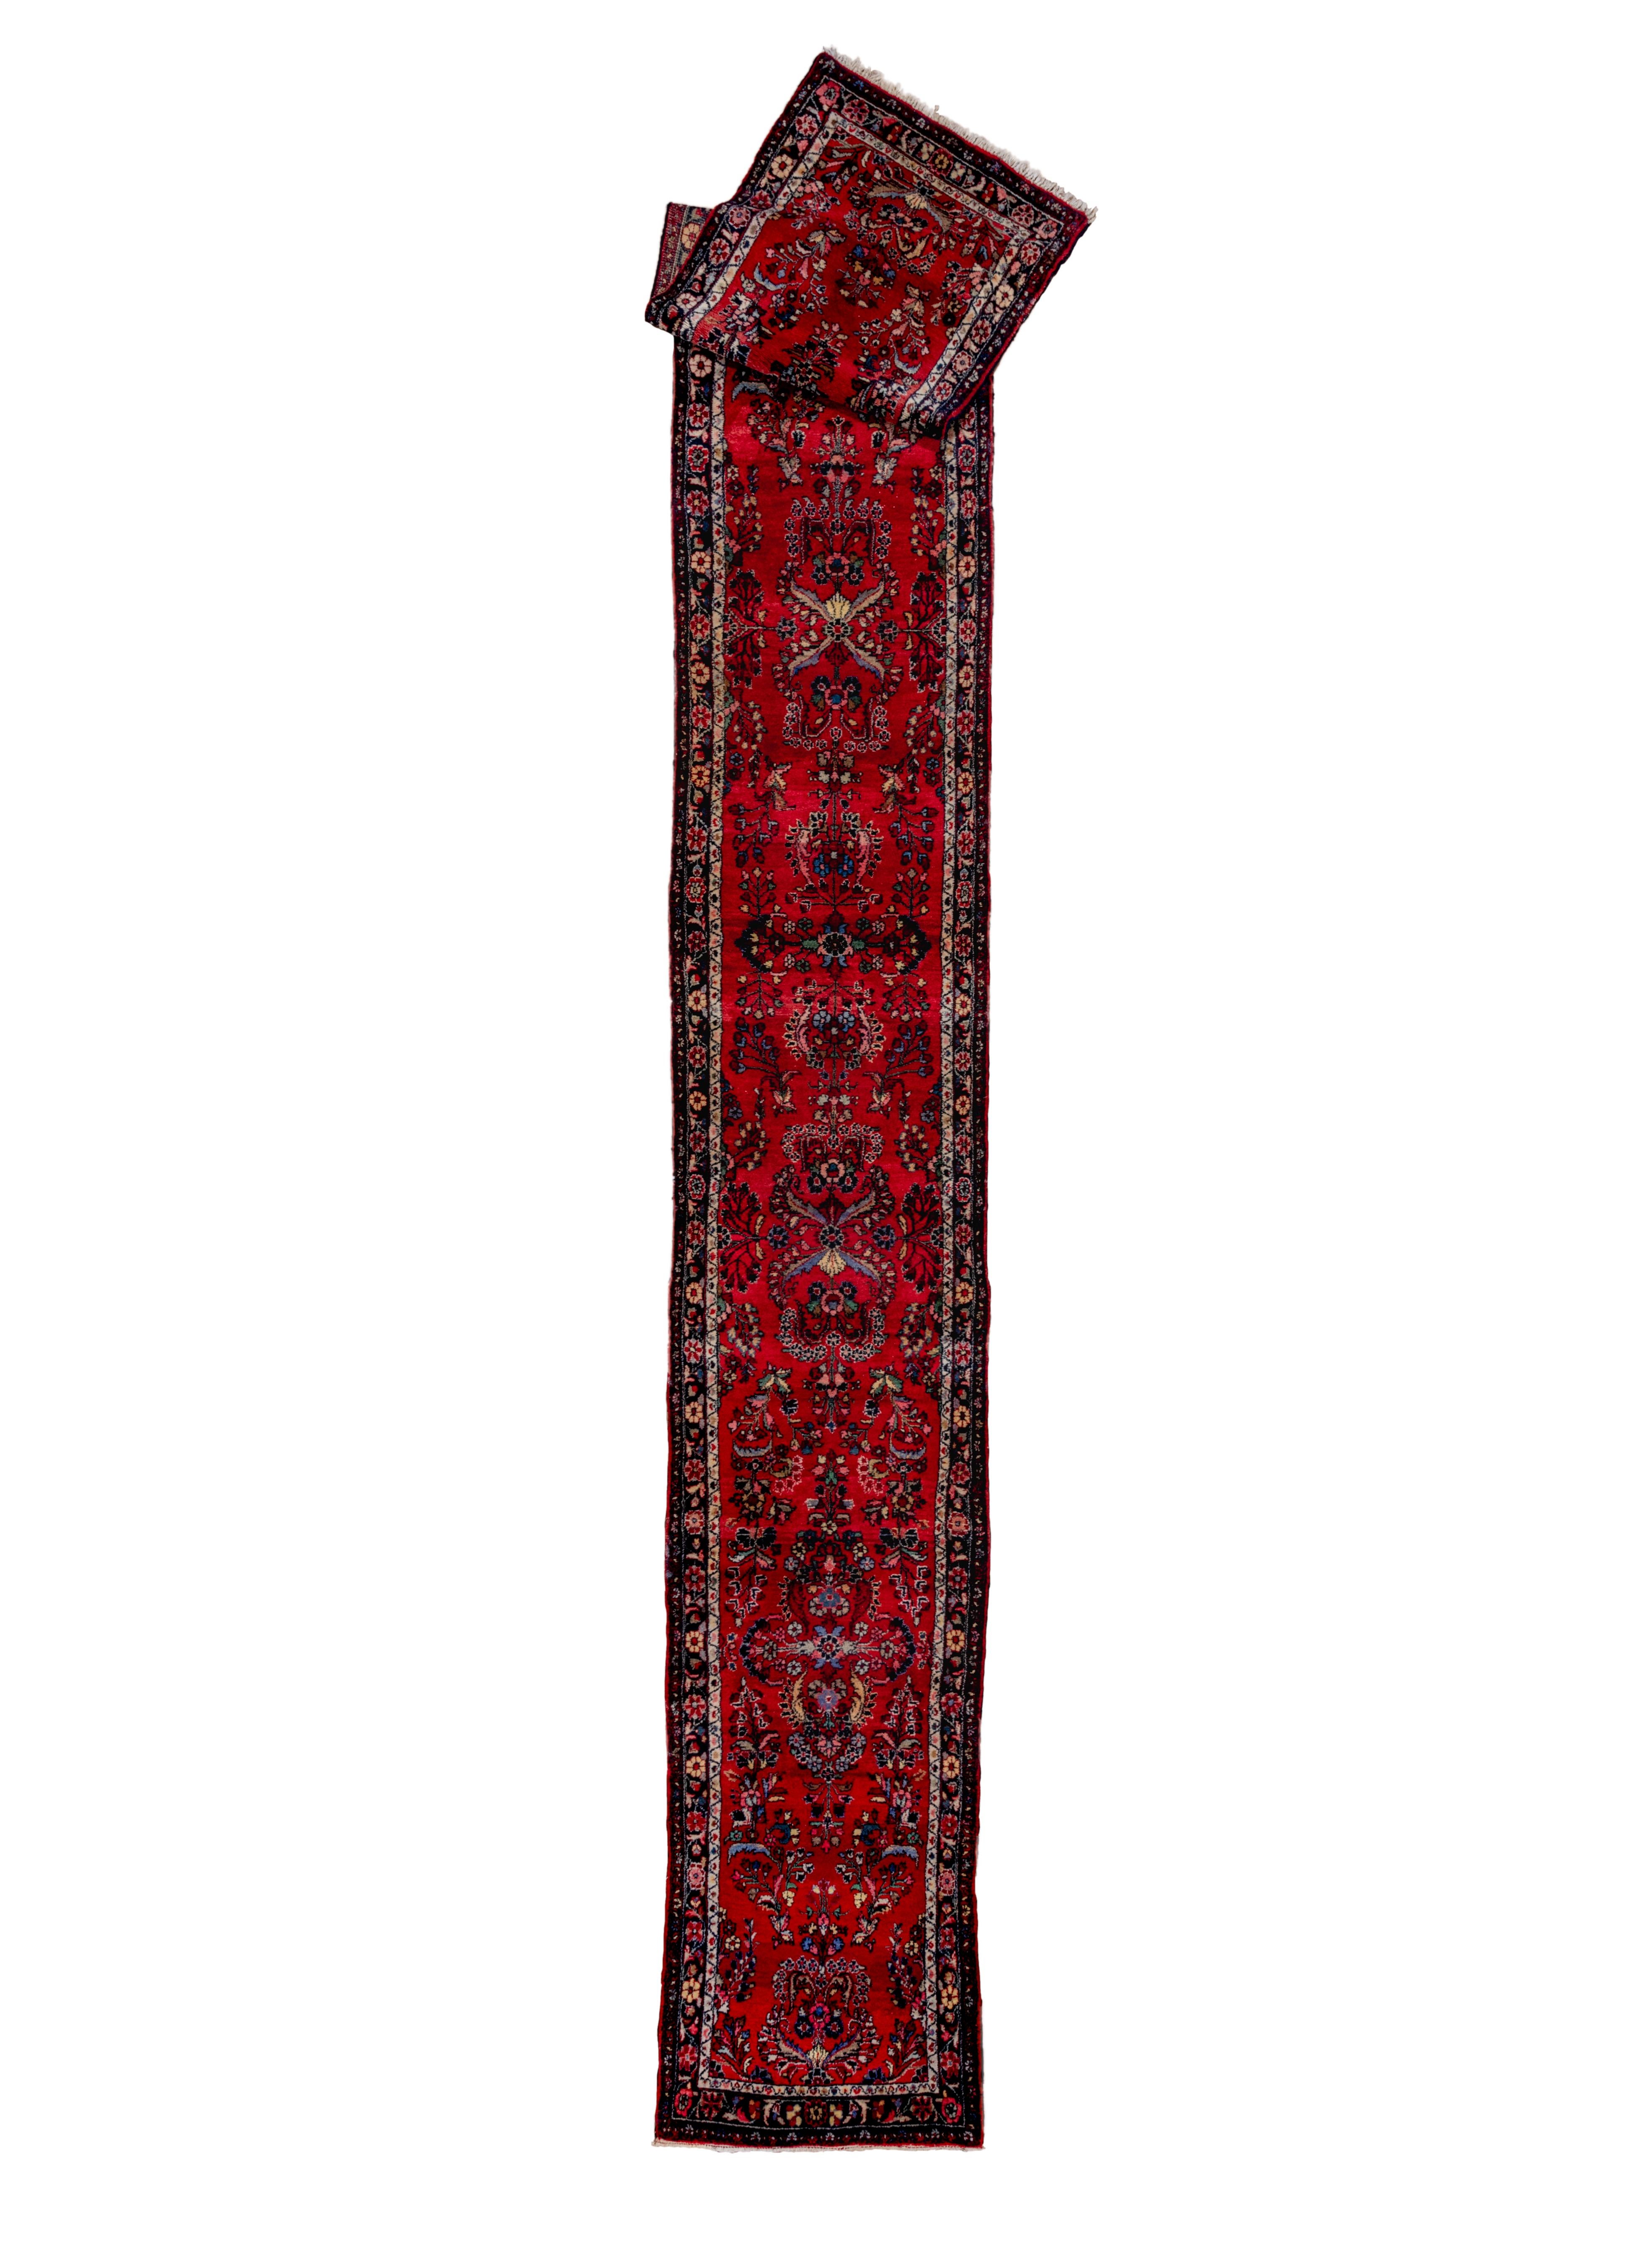 In the “American Sarouk” design of detached floral sprays on a red ground, this kenare (runner) was destined for the American market.  It is accented with a selection of blue tones along with ivory and straw. The navy blue border shows leaf-winged